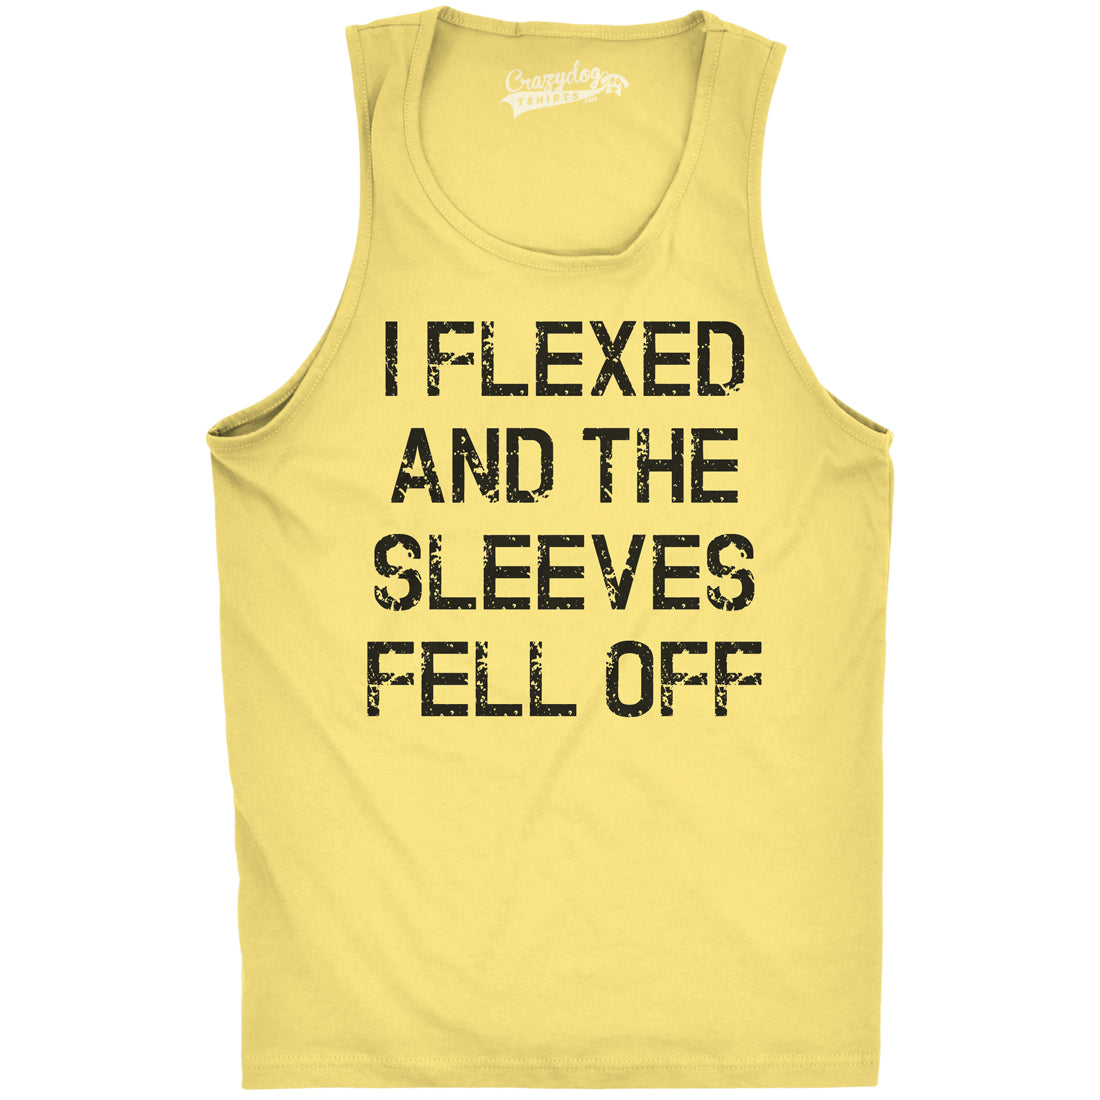 Funny Yellow I Flexed And The Sleeves Fell Off Mens Tank Top Nerdy Fitness Tee